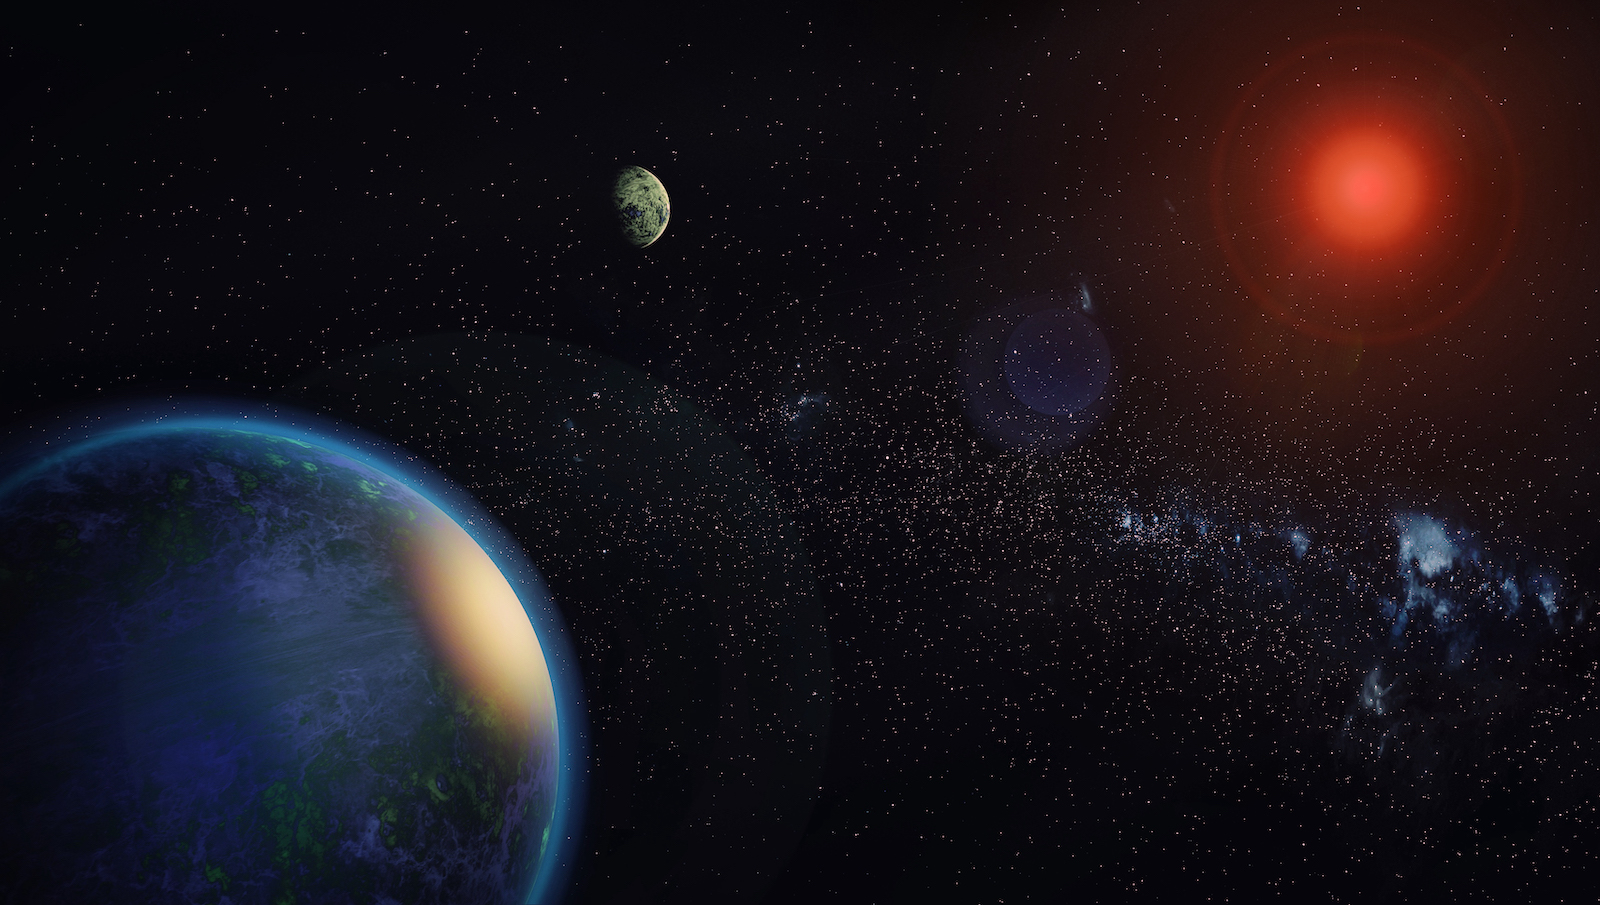 slide 1 - Illustration shows, at left, a large, bluish foreground planet, to its upper right a more distant, mottled, gray-green world, and opposite that, at the upper right, a red-tinged host star. We see a spray of background stars in the lower right.